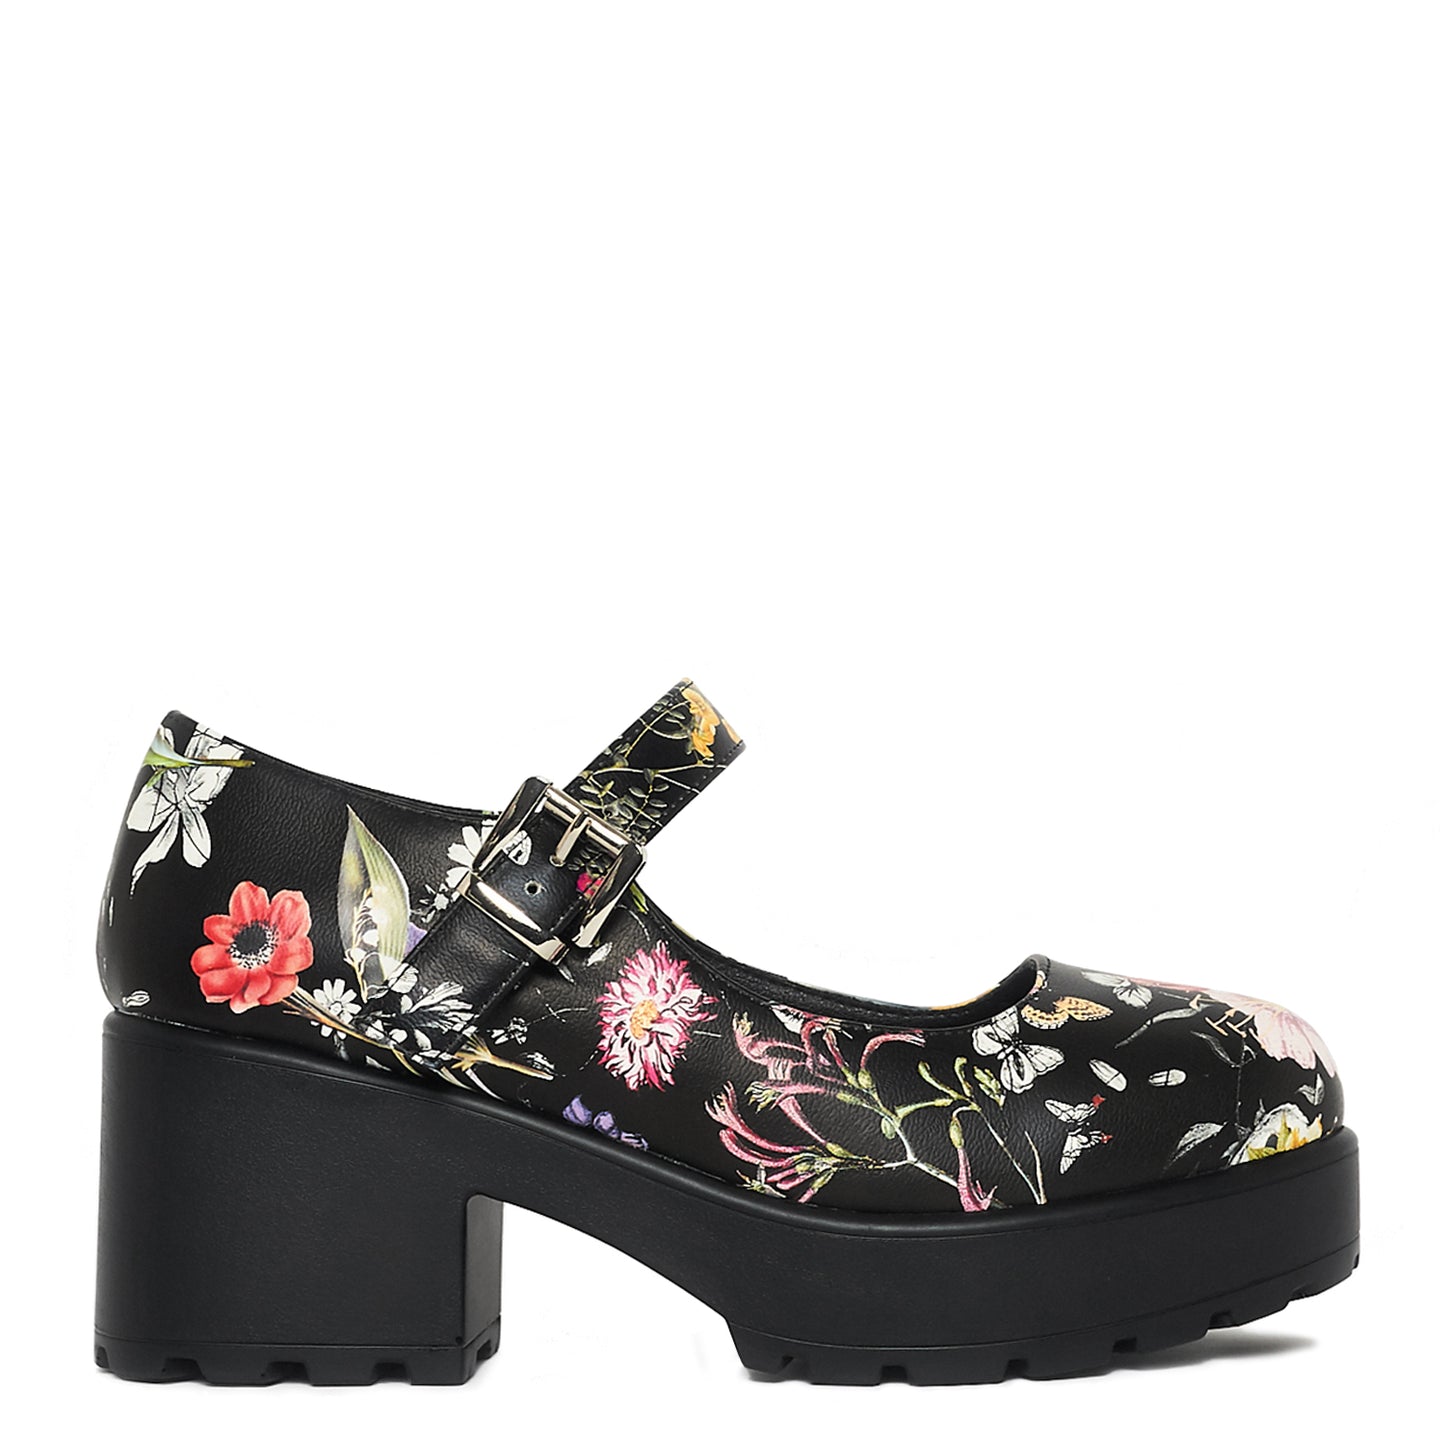 Tira Mary Jane Shoes 'Floral Edition' - Mary Janes - KOI Footwear - Black - Main View